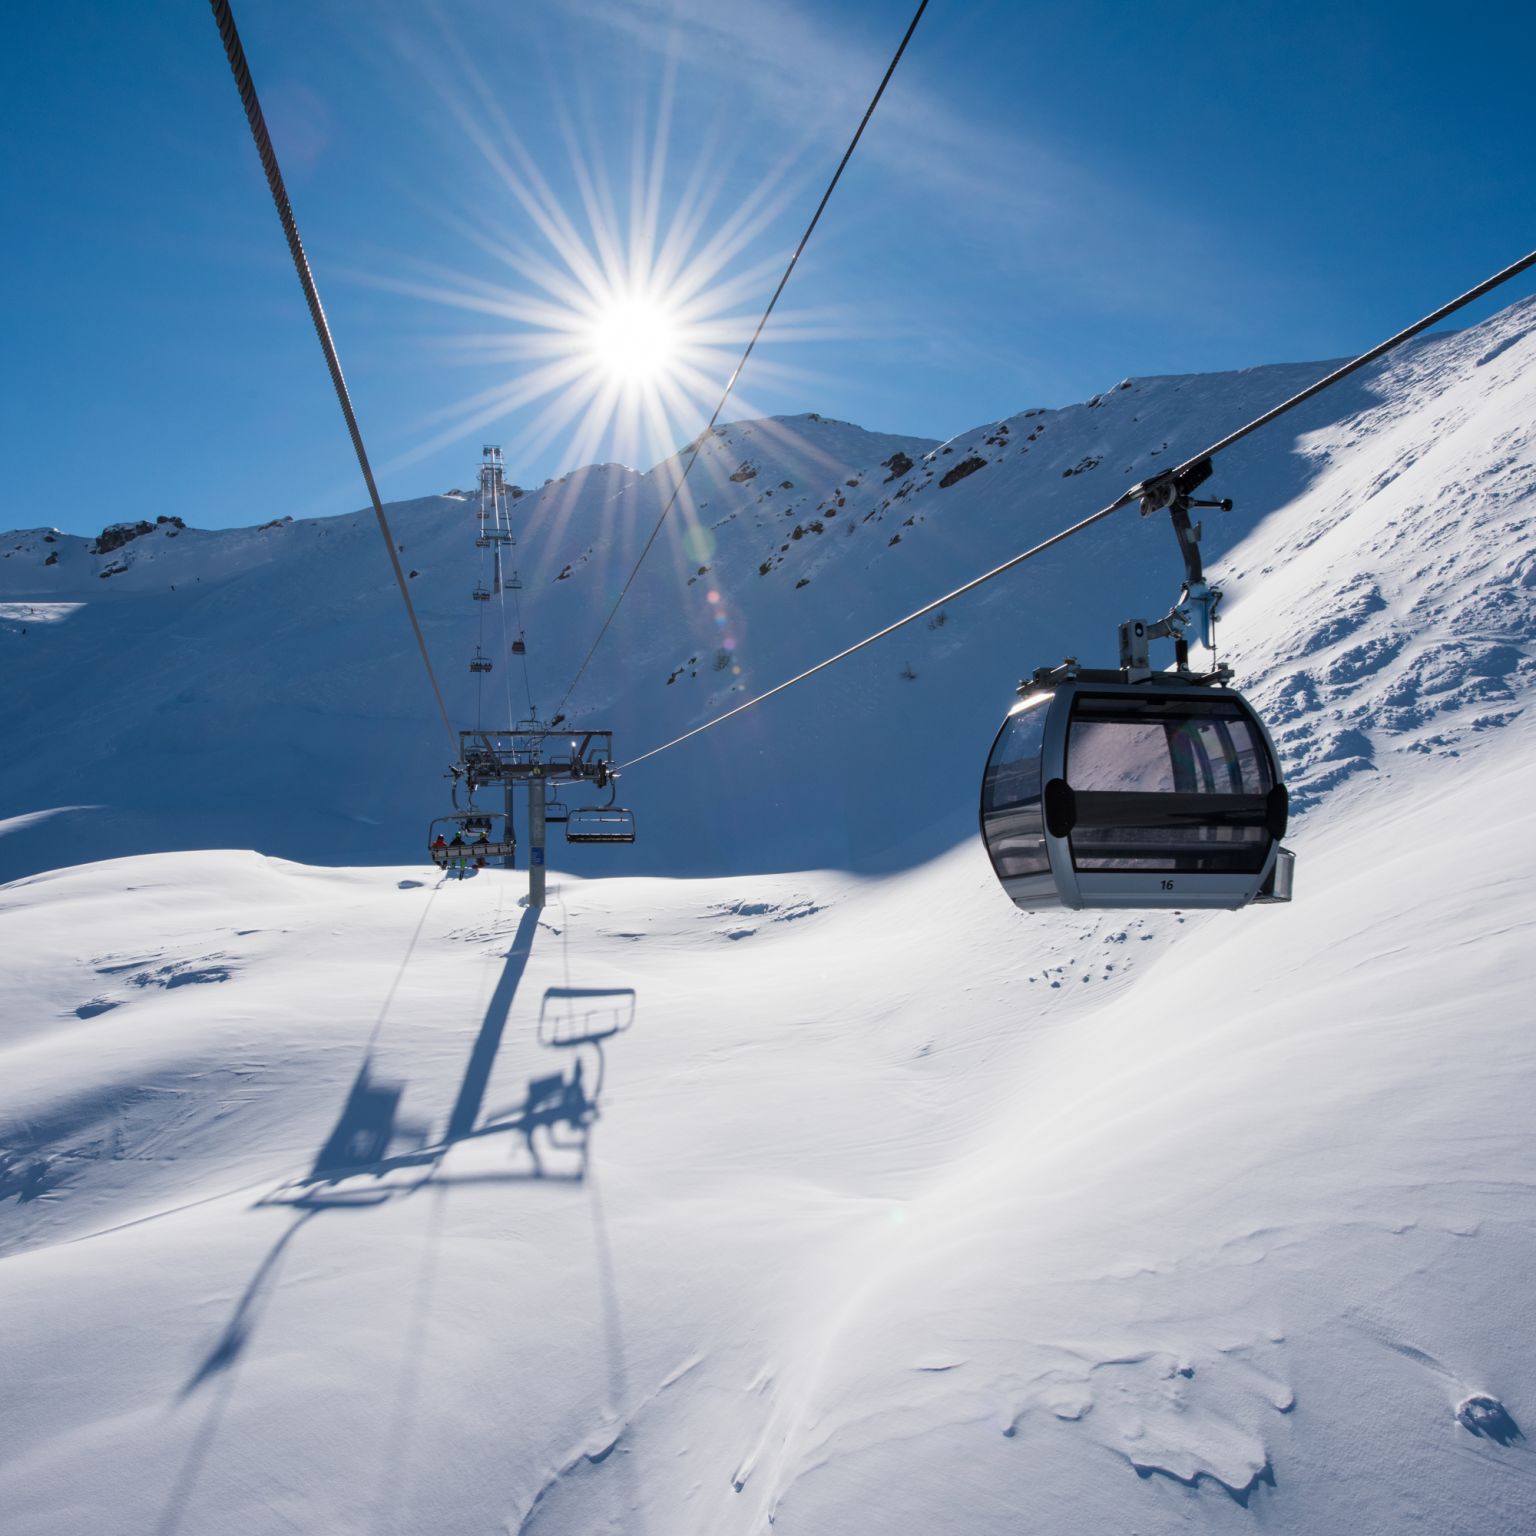 The gondola lift takes skiers to the top of the slopes in Verbier. Valais, Switzerland.